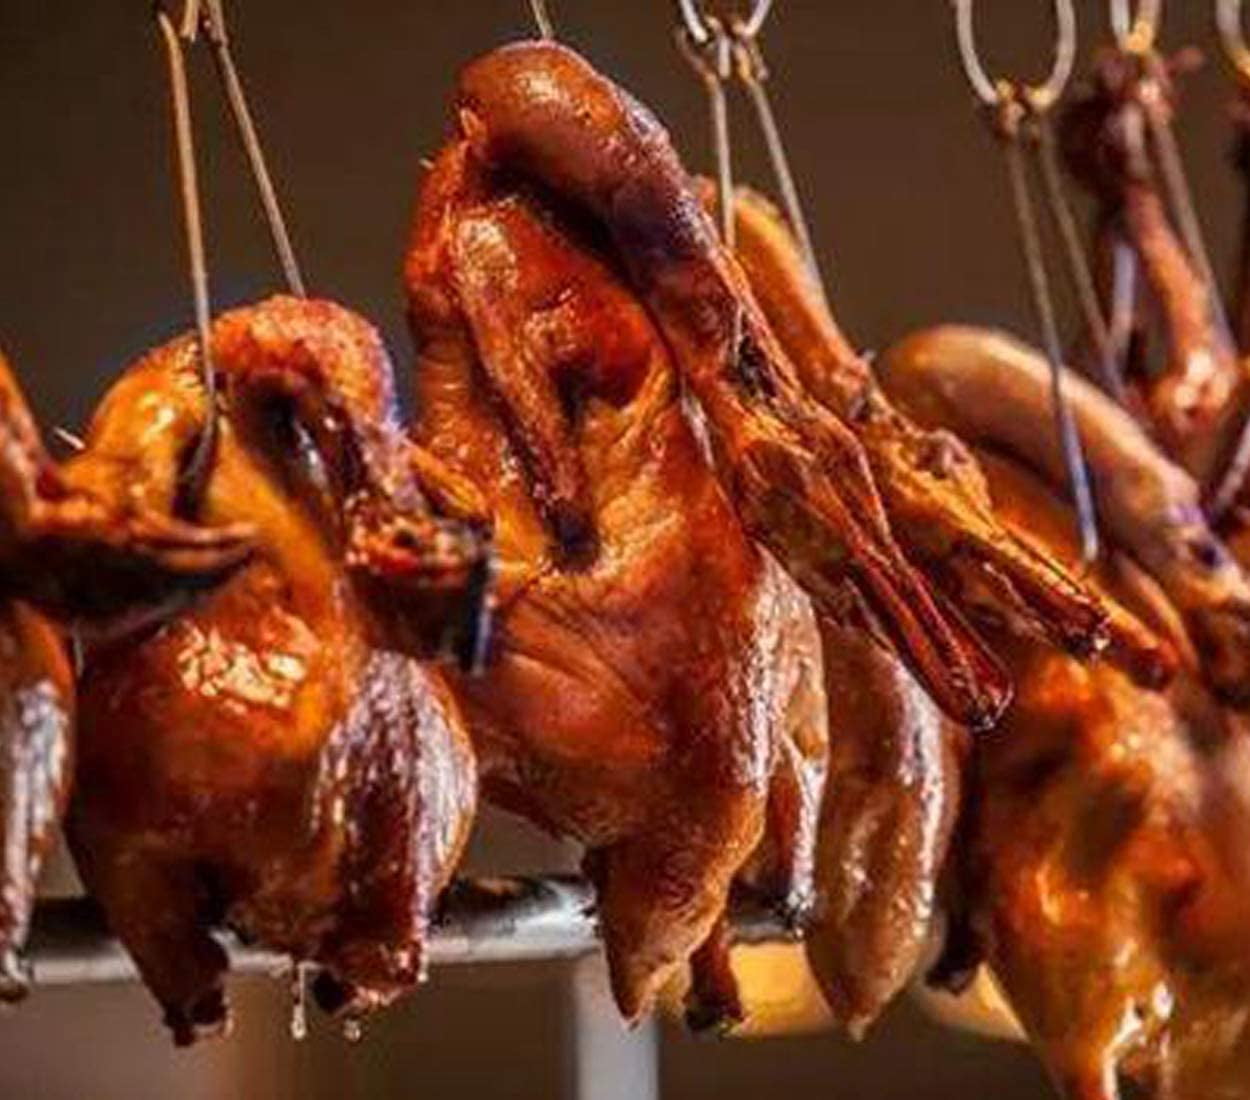 Roasted ducks hanging from metal meat hooks in the window of a